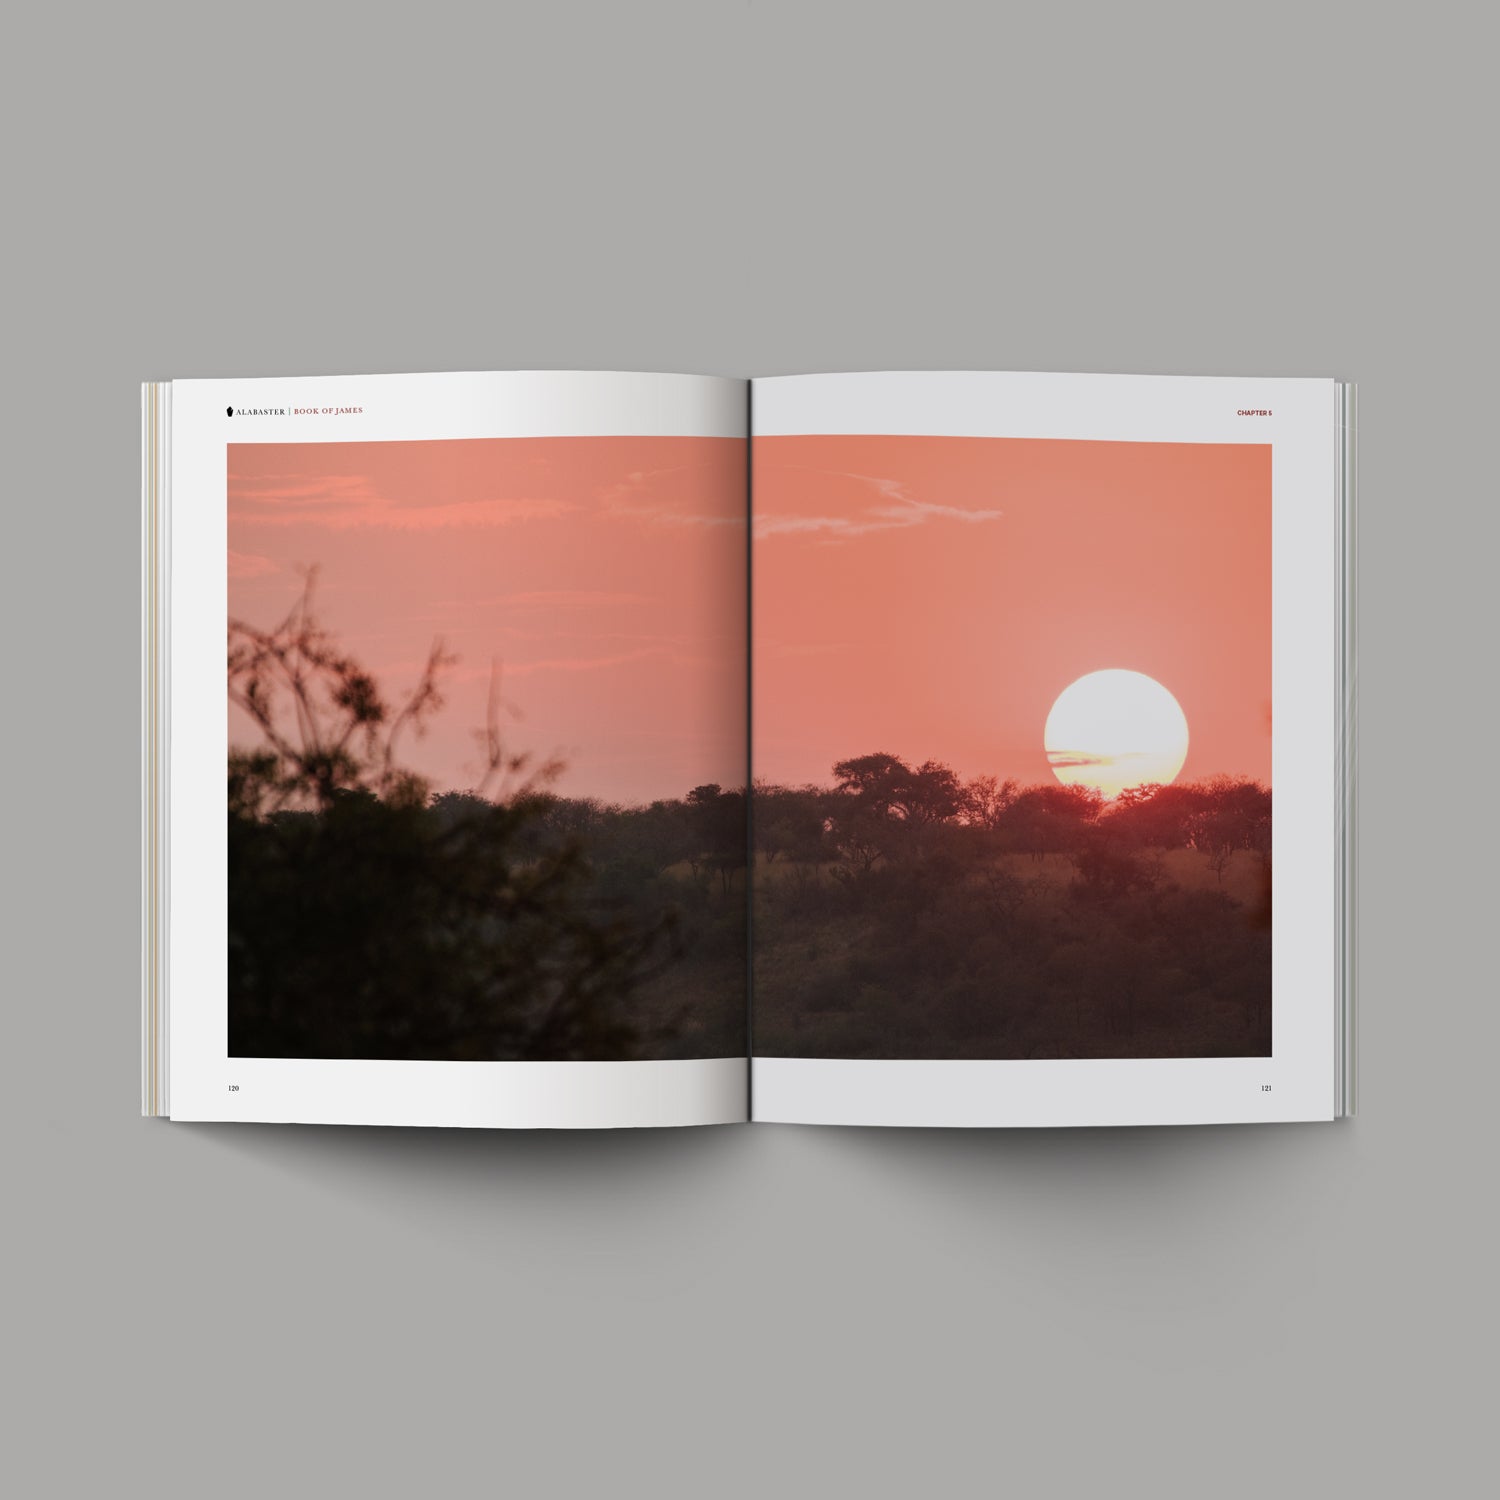 The Book of James open with sunset image